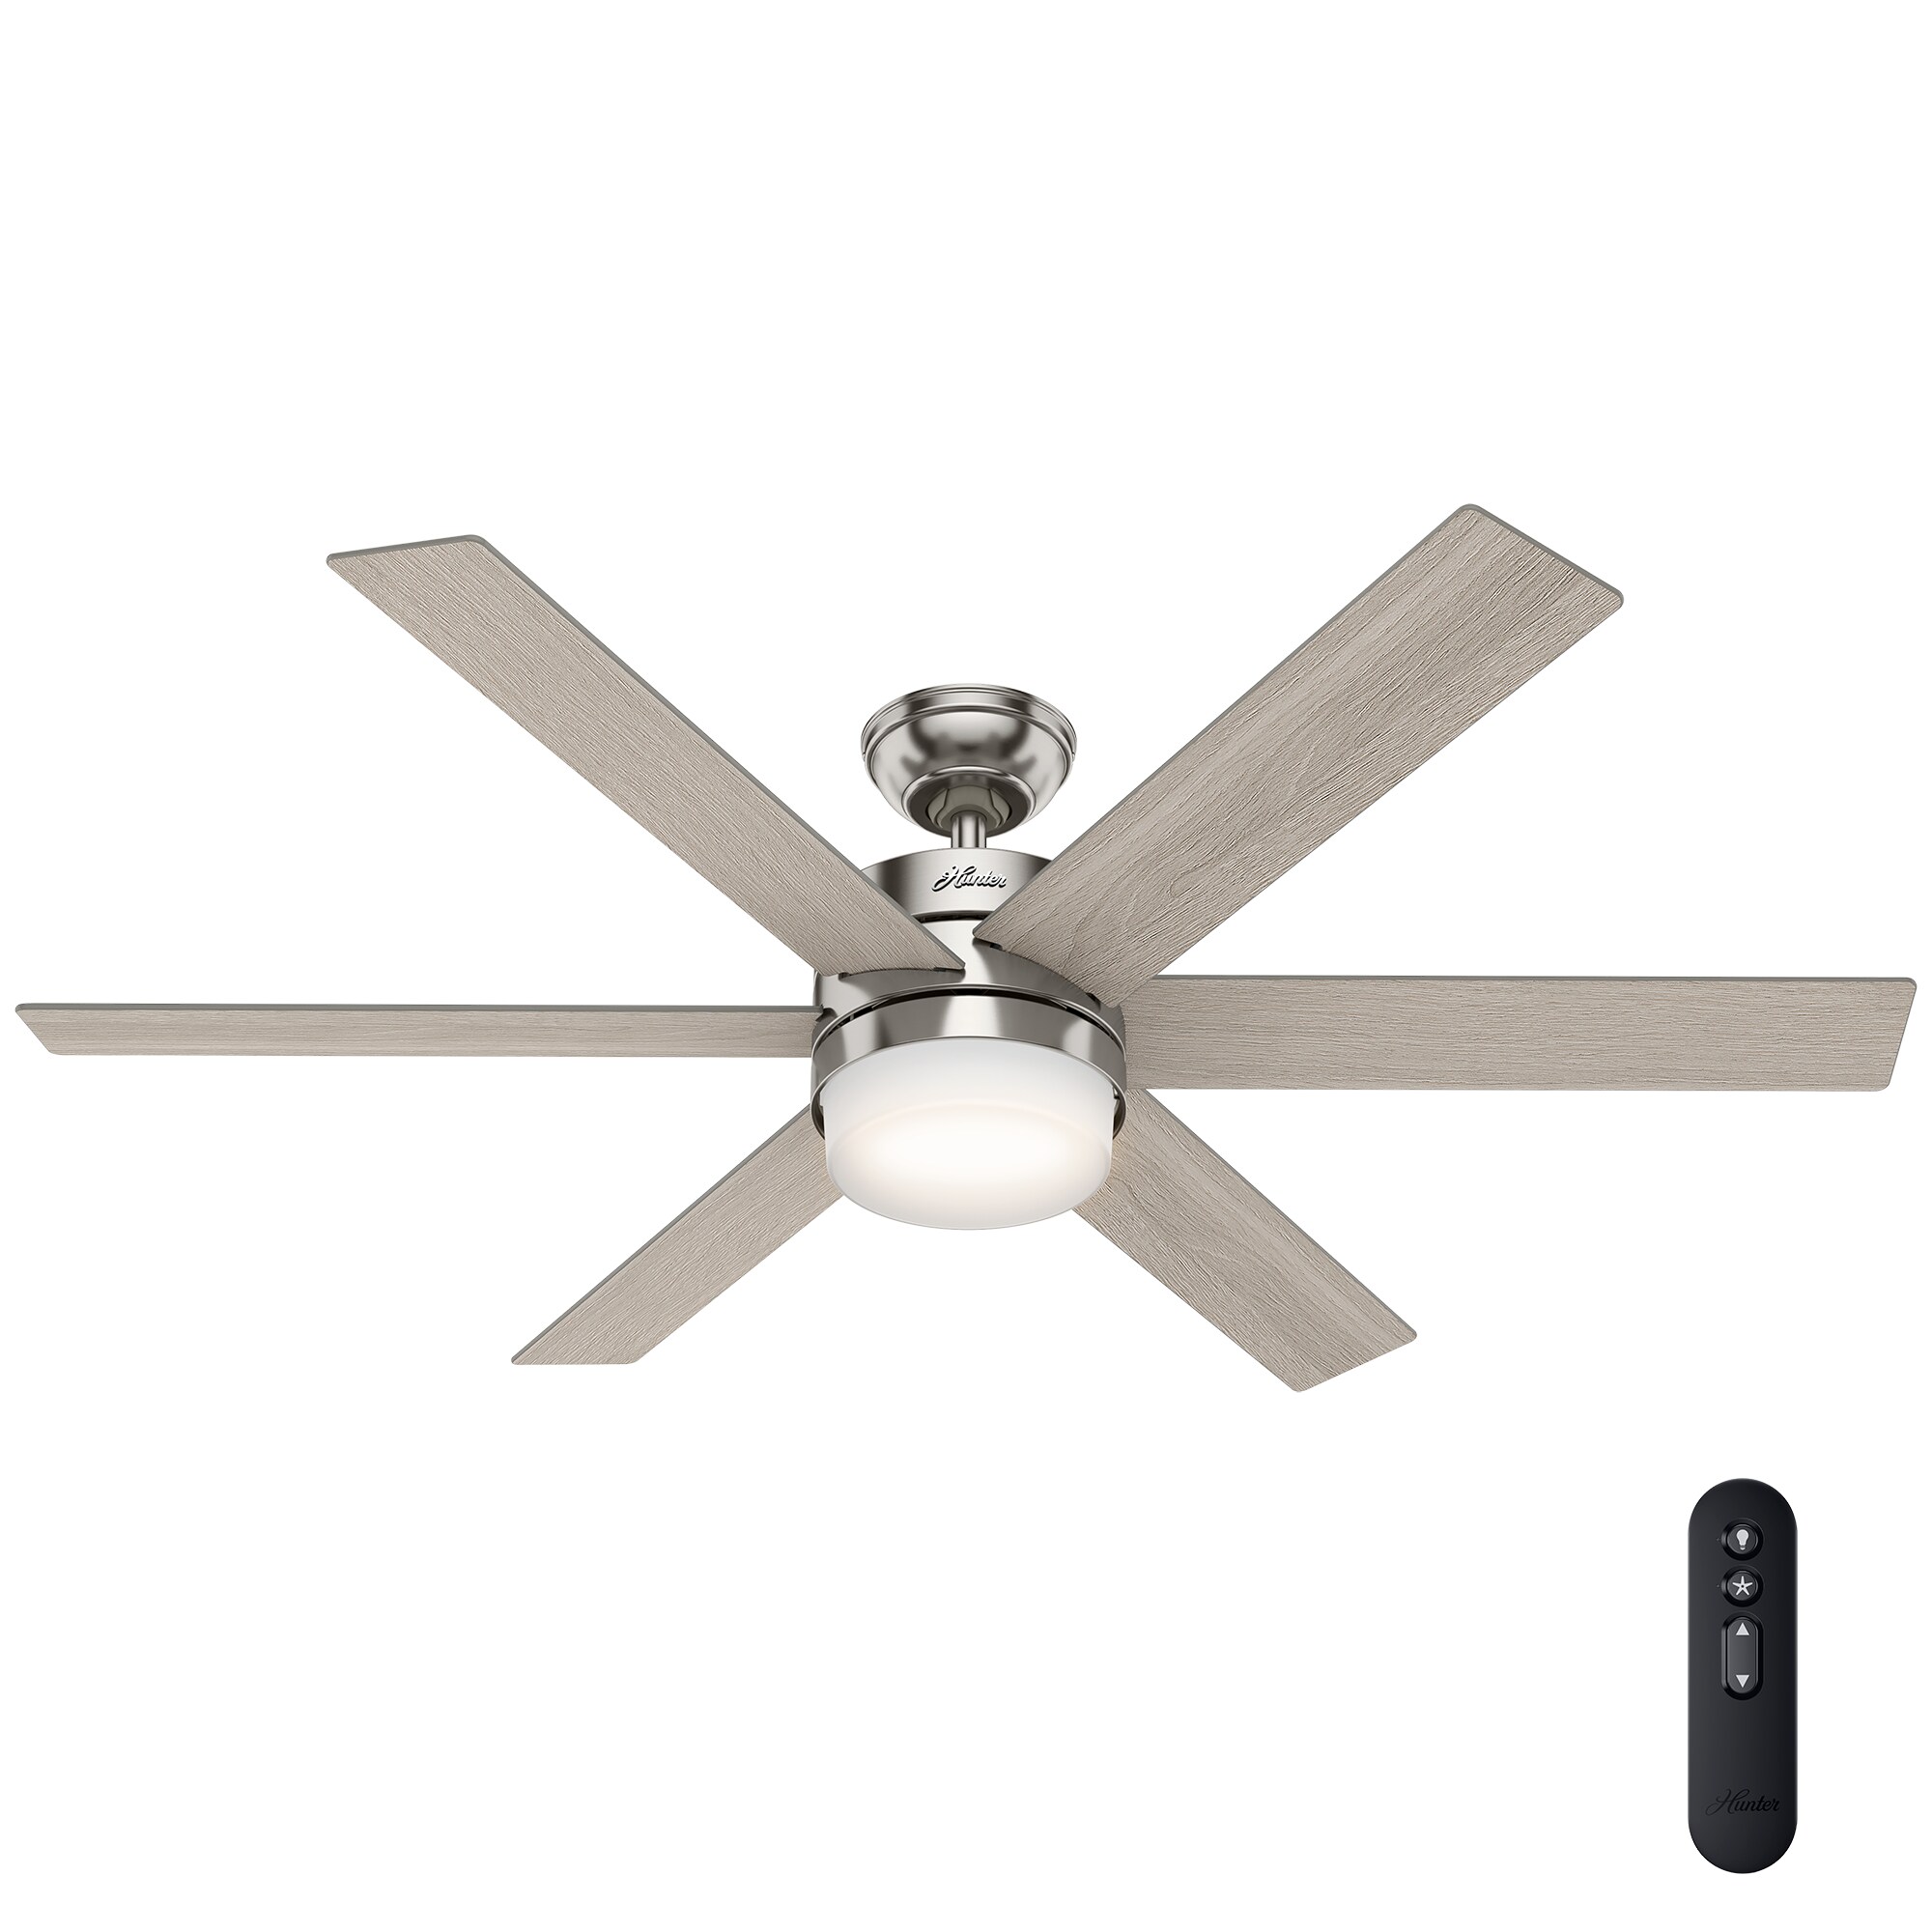 Home Dec Int Kensgrove 54 in LED Indoor White Ceiling Fan w/Light Kit &Remote 